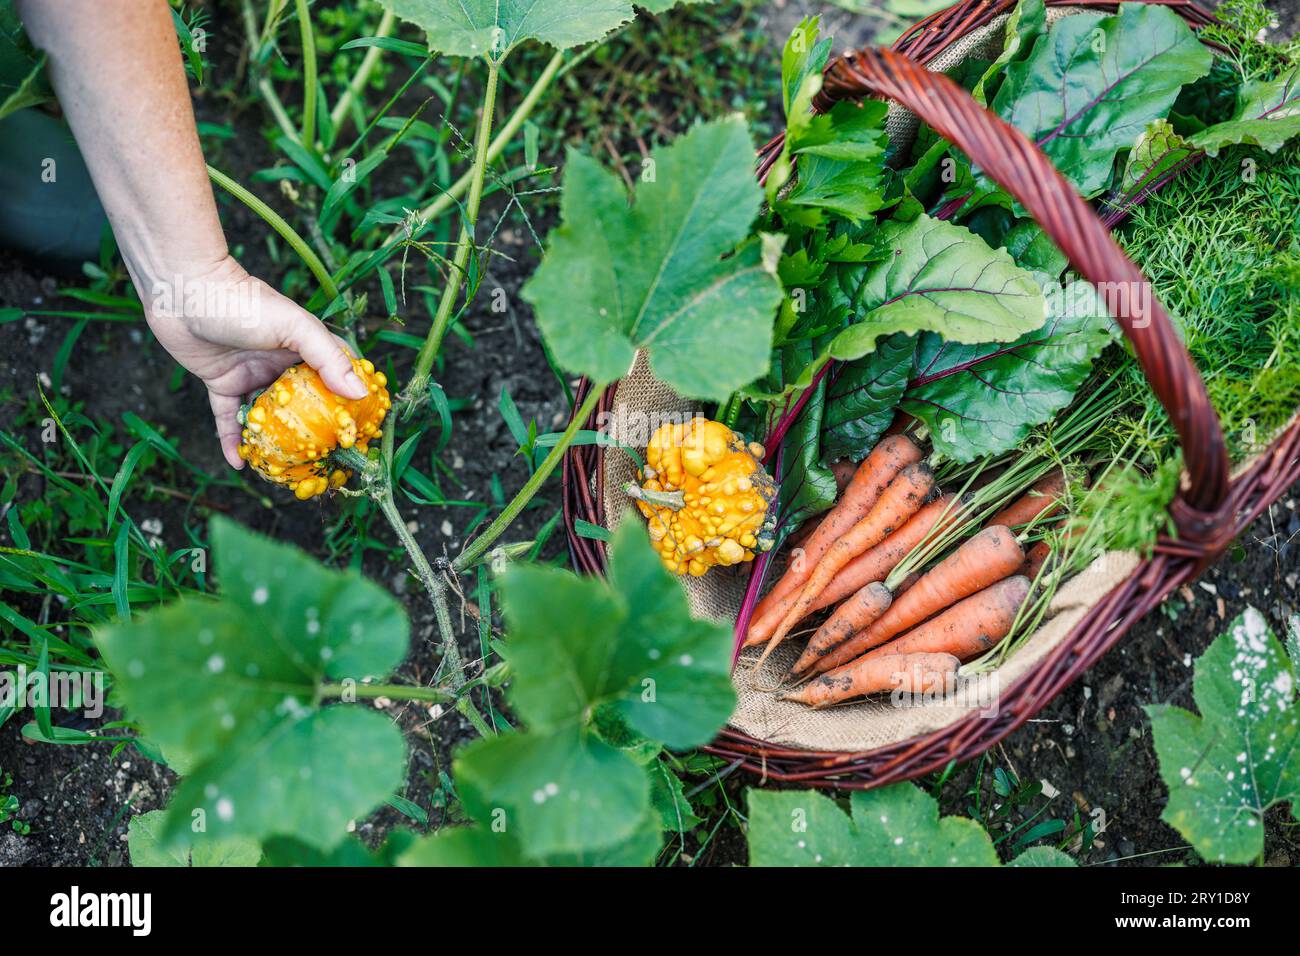 Picking vegetable from organic garden. Decorative pumpkin and fresh harvested carrots in wicker basket Stock Photo